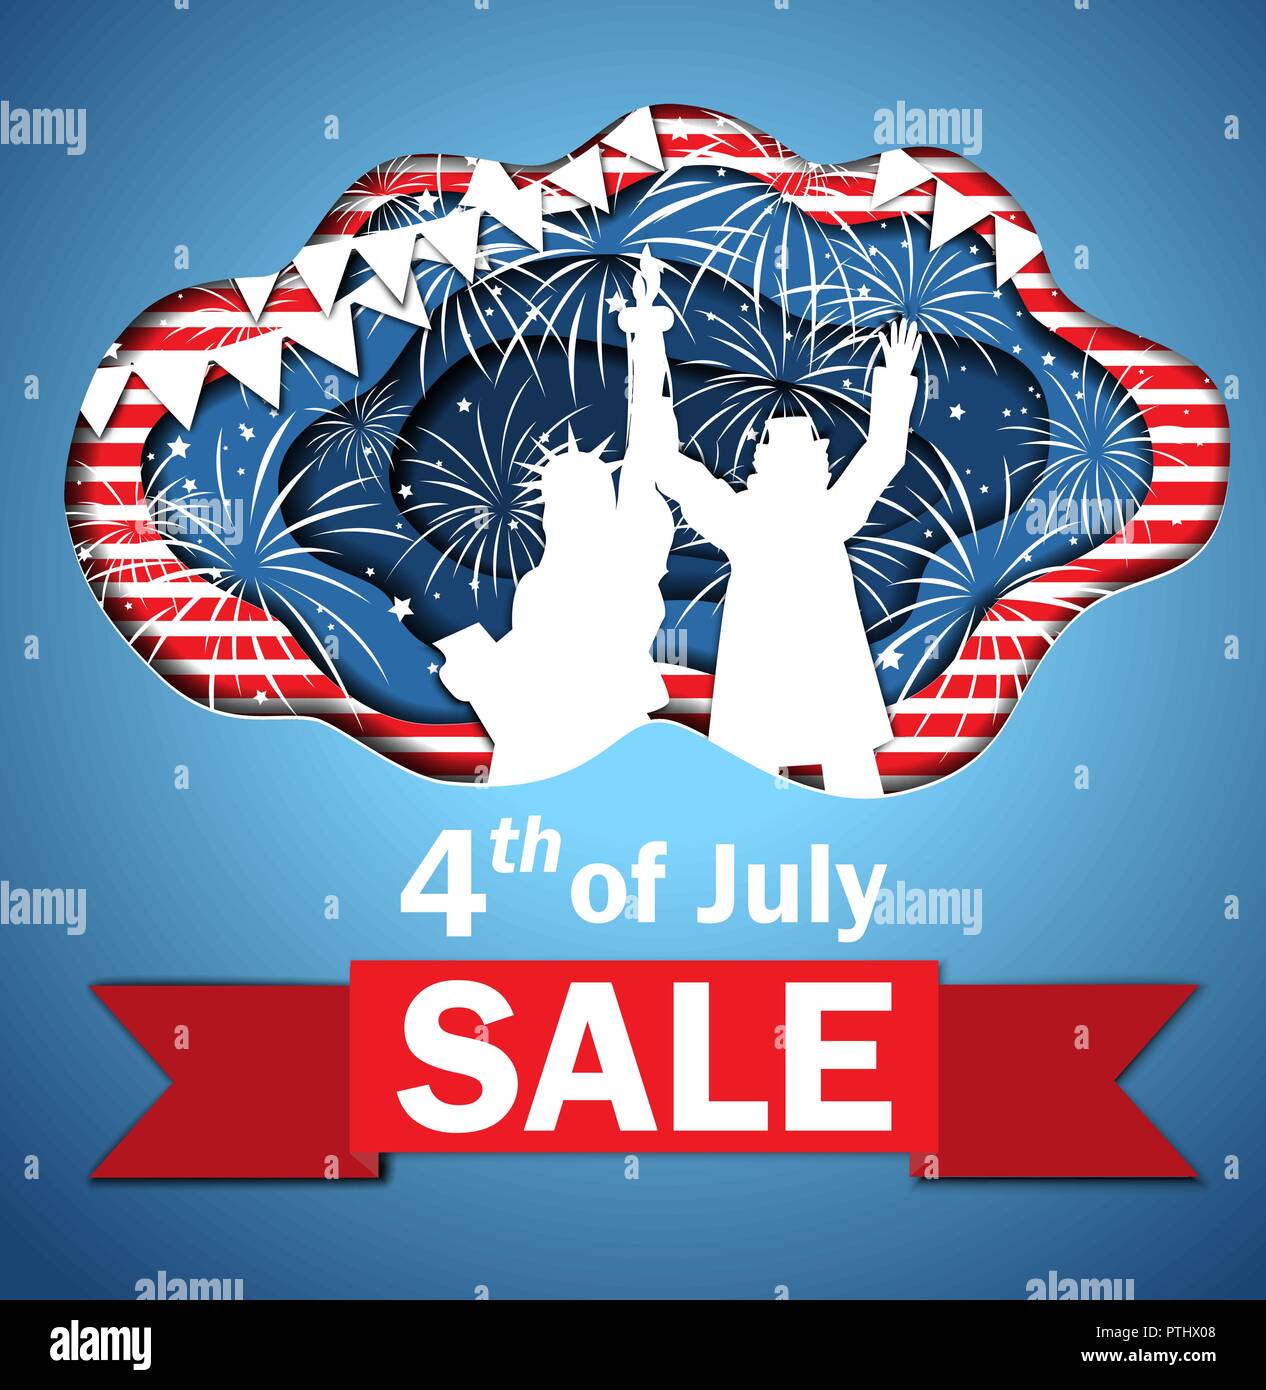 Independence Day Sale. Funny paper cut banner for Independence Day July 4 USA with Statue of Liberty and Uncle Sam together. Vector illustration. Nati Stock Vector